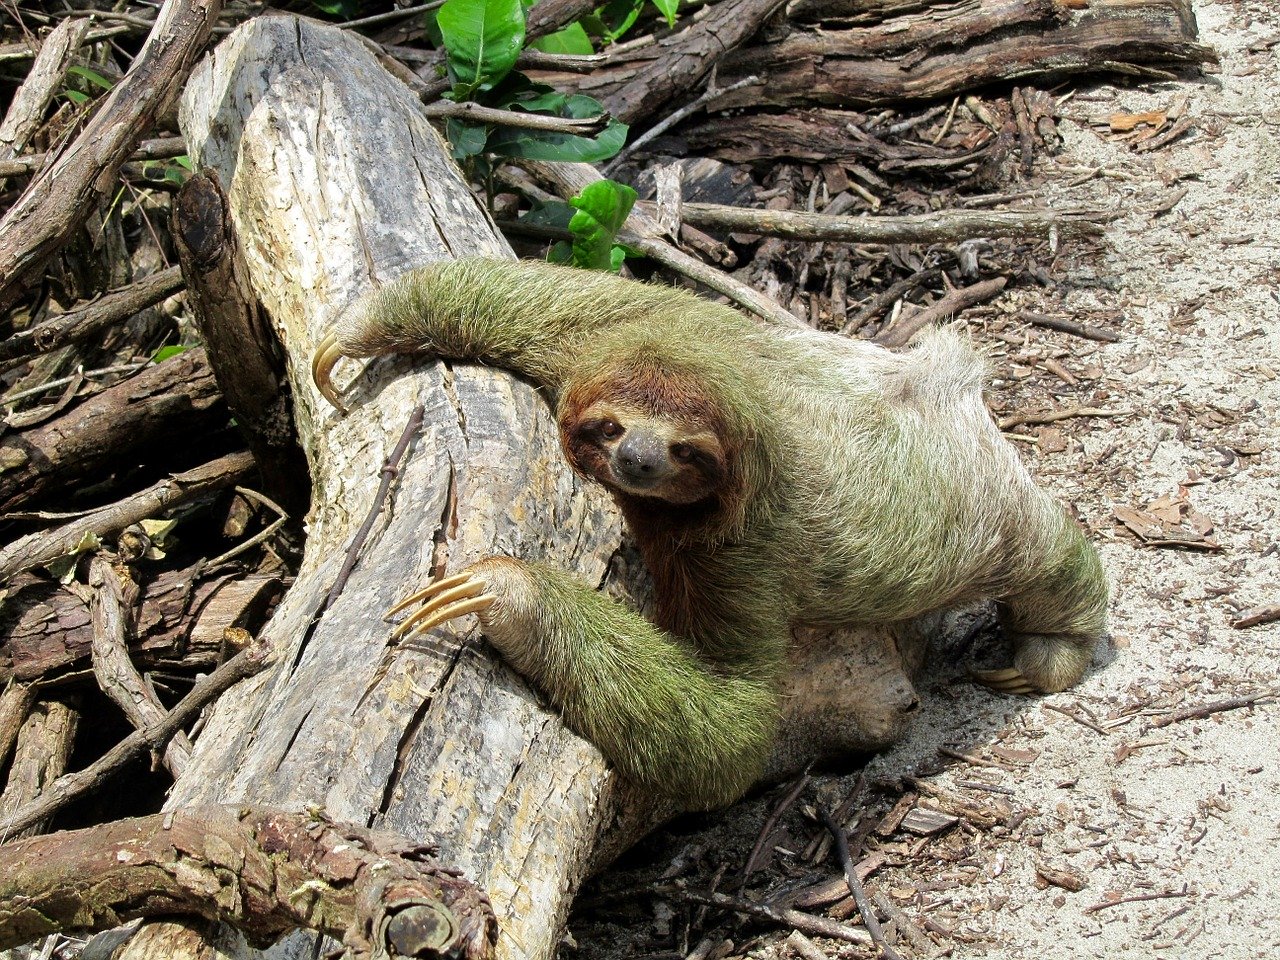 Sloth hanging on log in Costa Rica